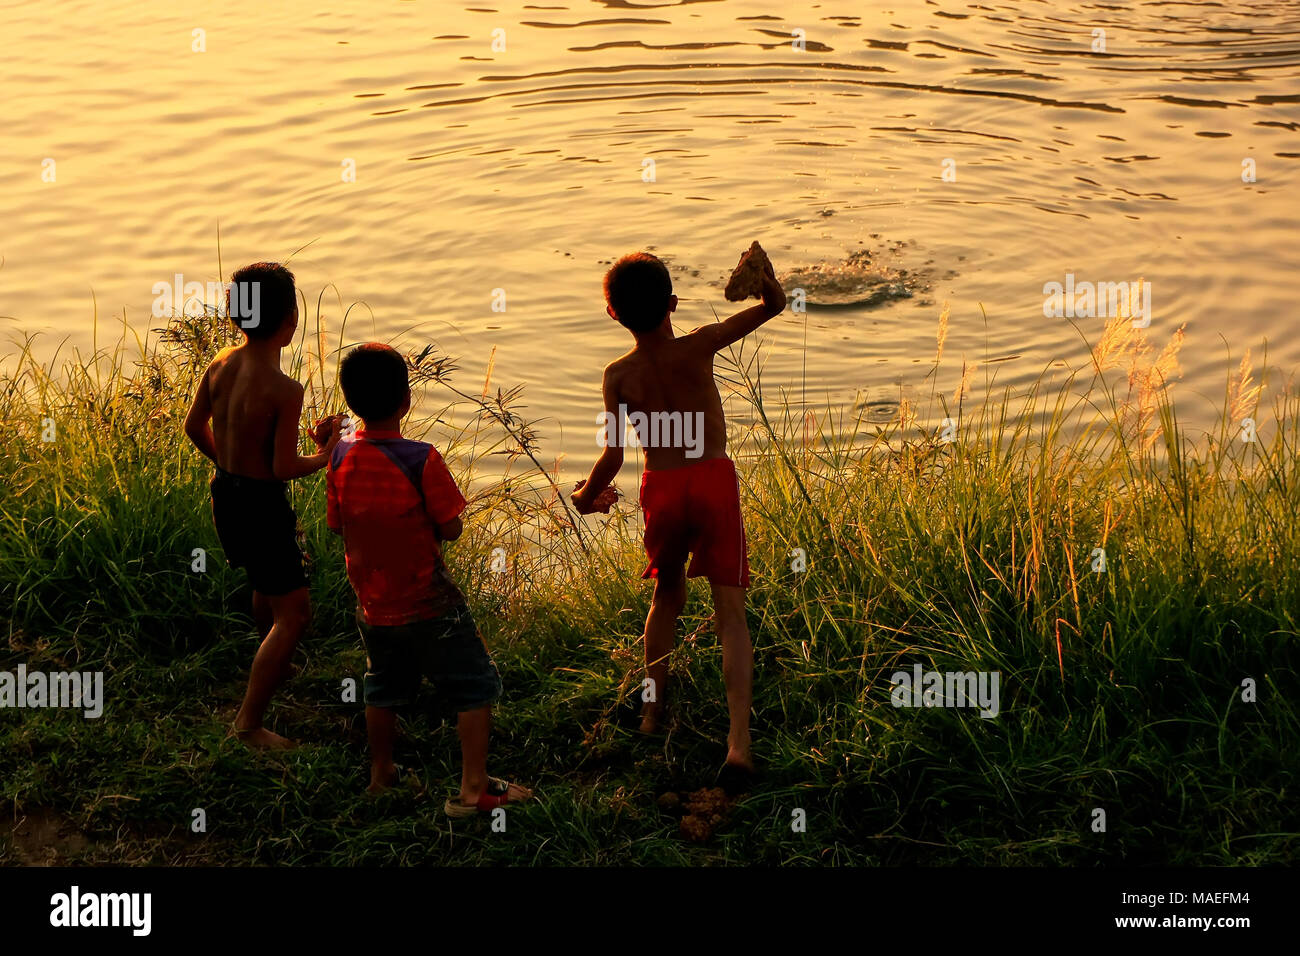 Local kids throwing rocks in Nam Song River at sunset, Vang Vieng, Laos. Vang Vieng is a popular destination for adventure tourism in a limestone kar Stock Photo